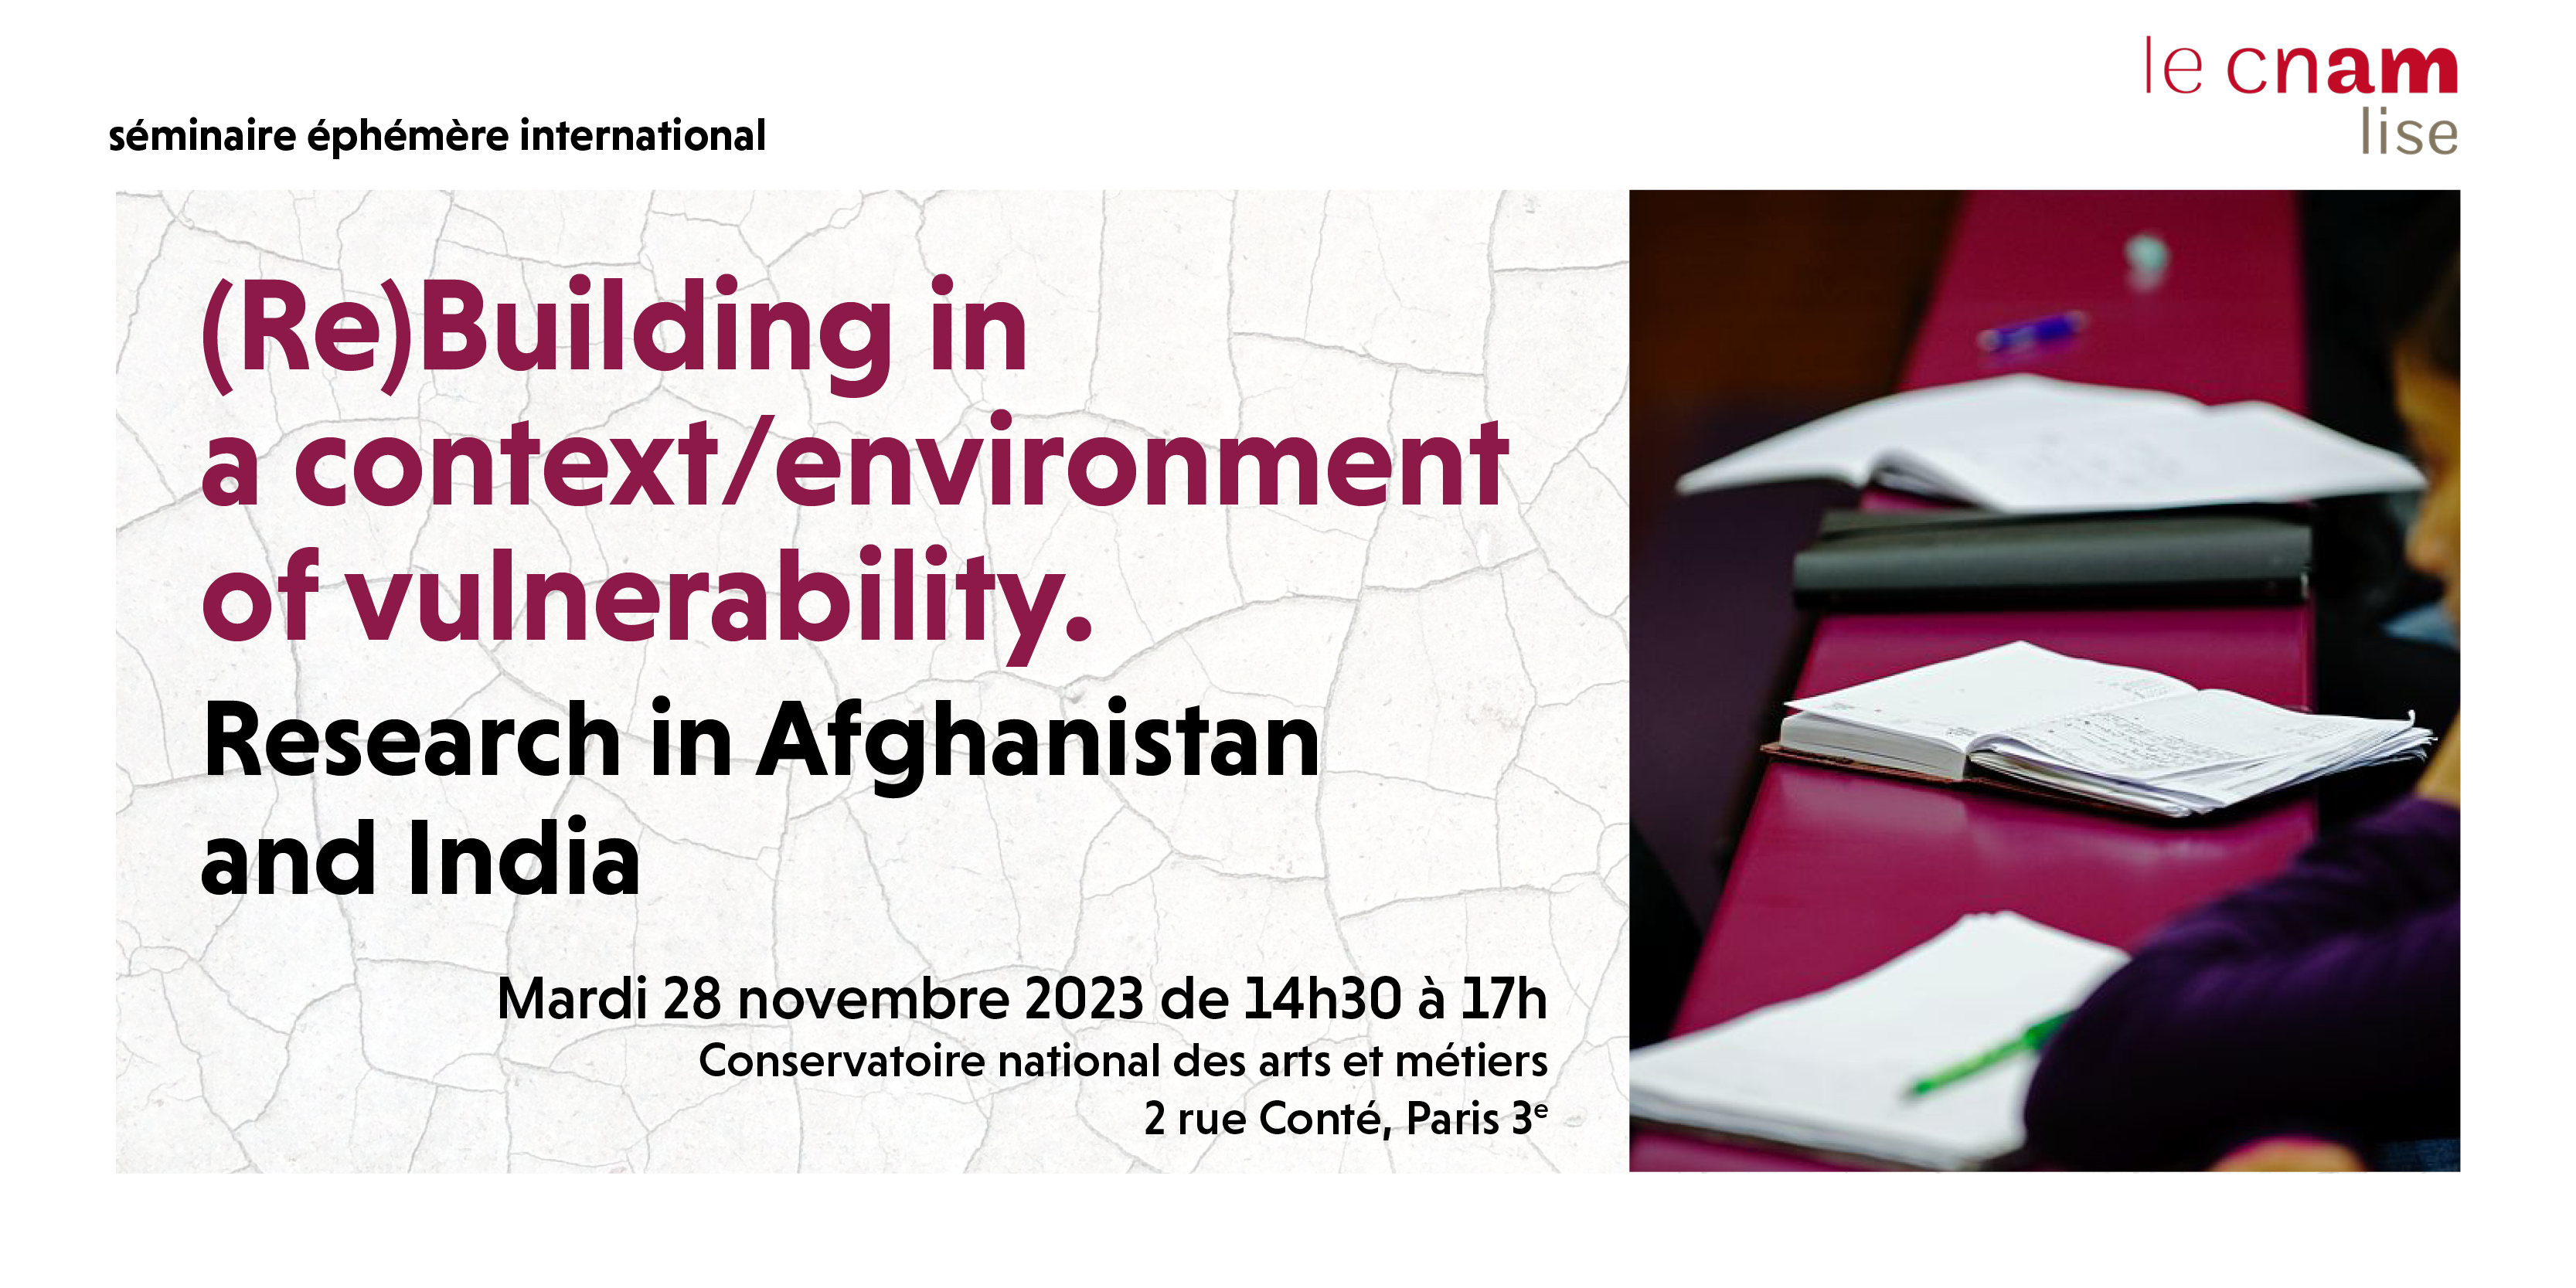 (Re)Building in a context/environment of vulnerability. Research in Afghanistan and India 